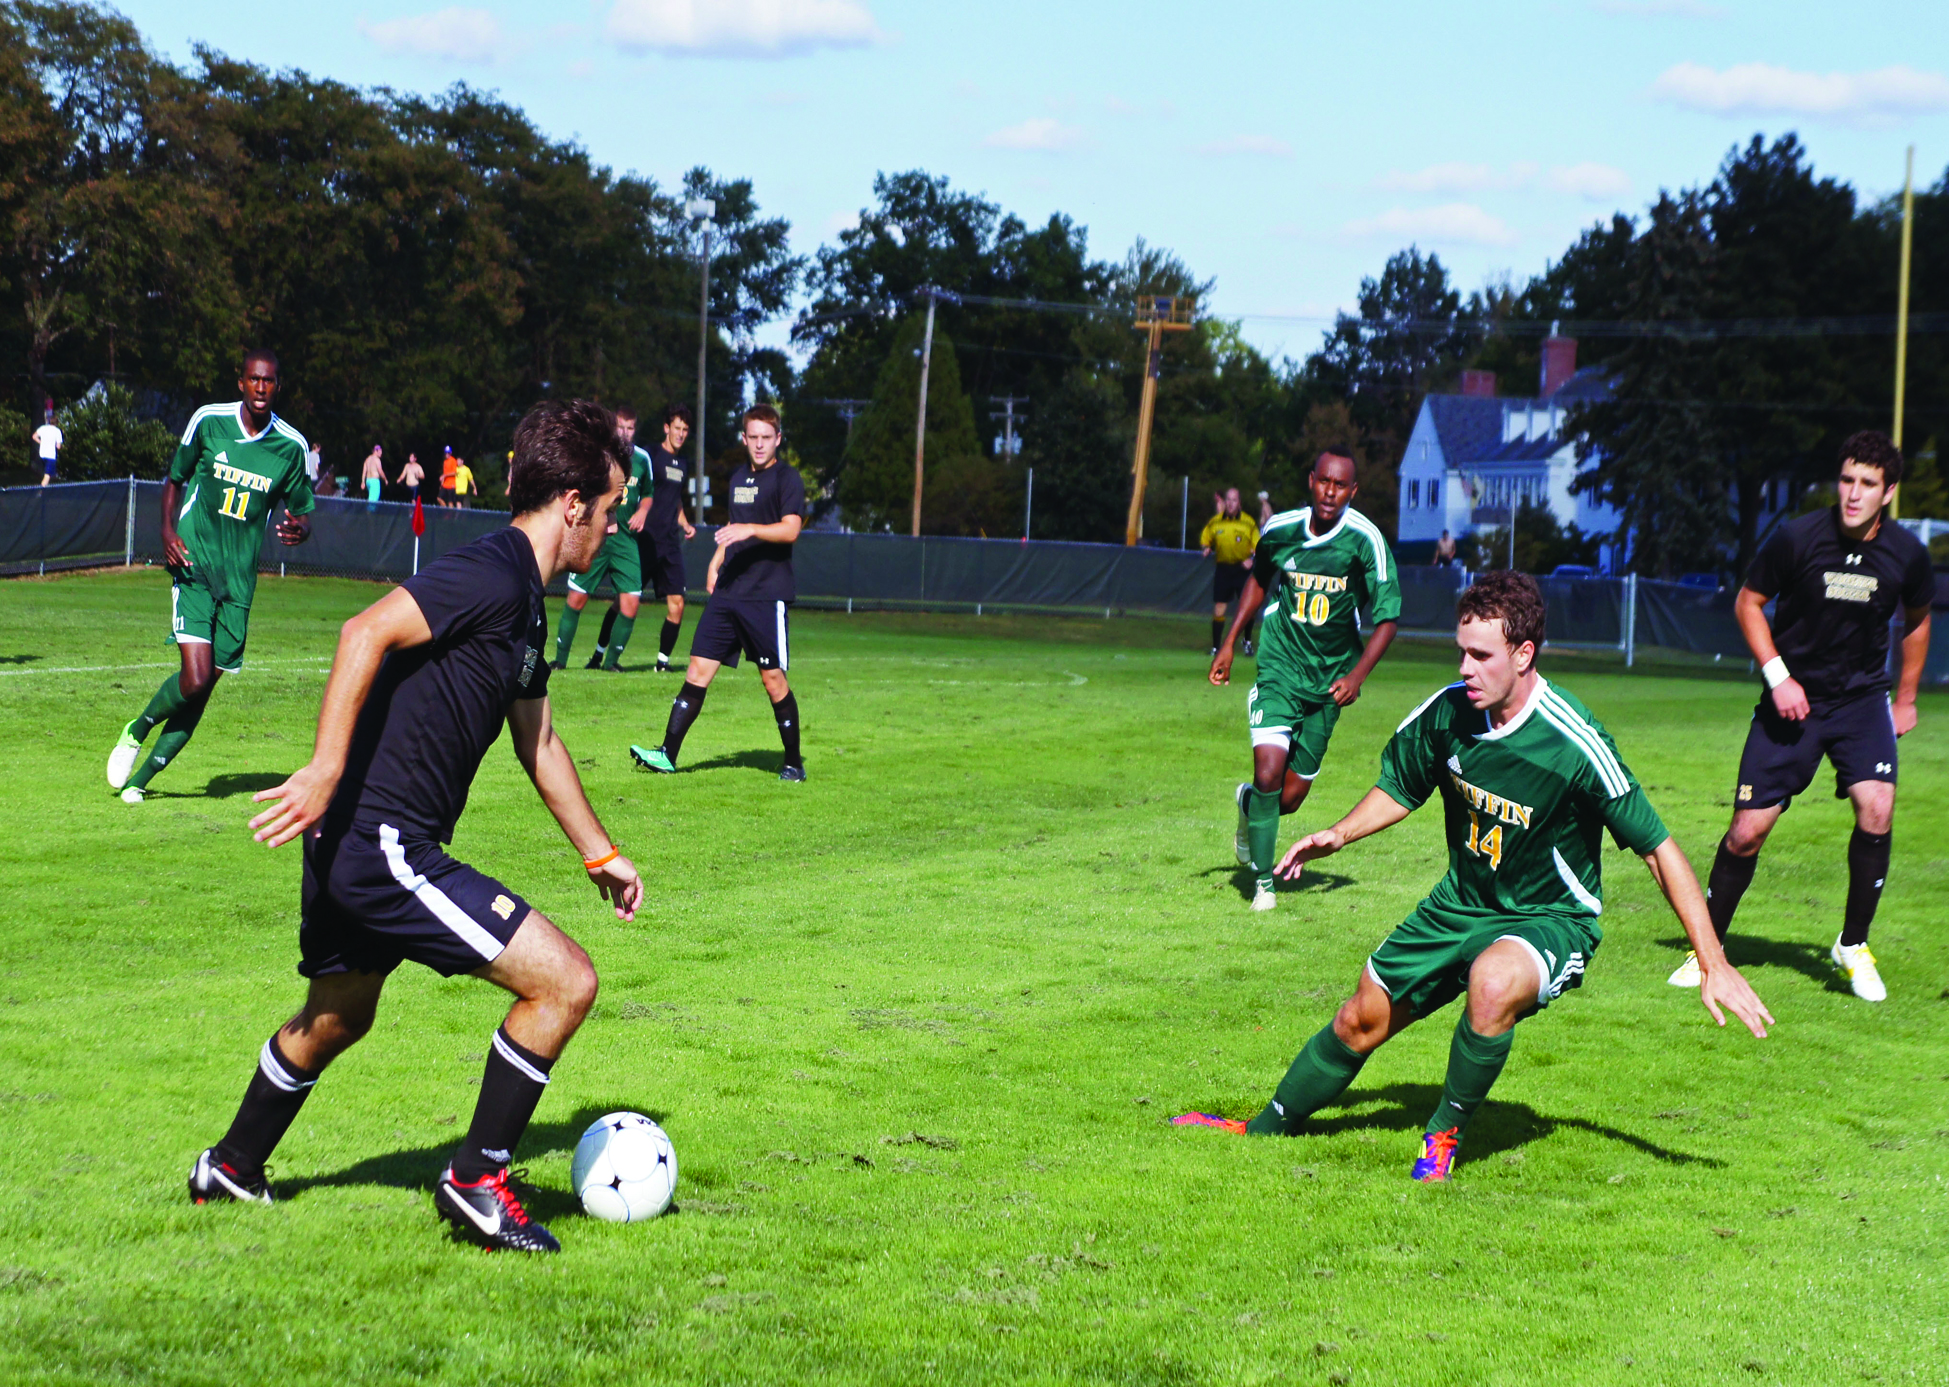 Soccer teams both looking to improve on 2011 seasons - The Wooster Voice